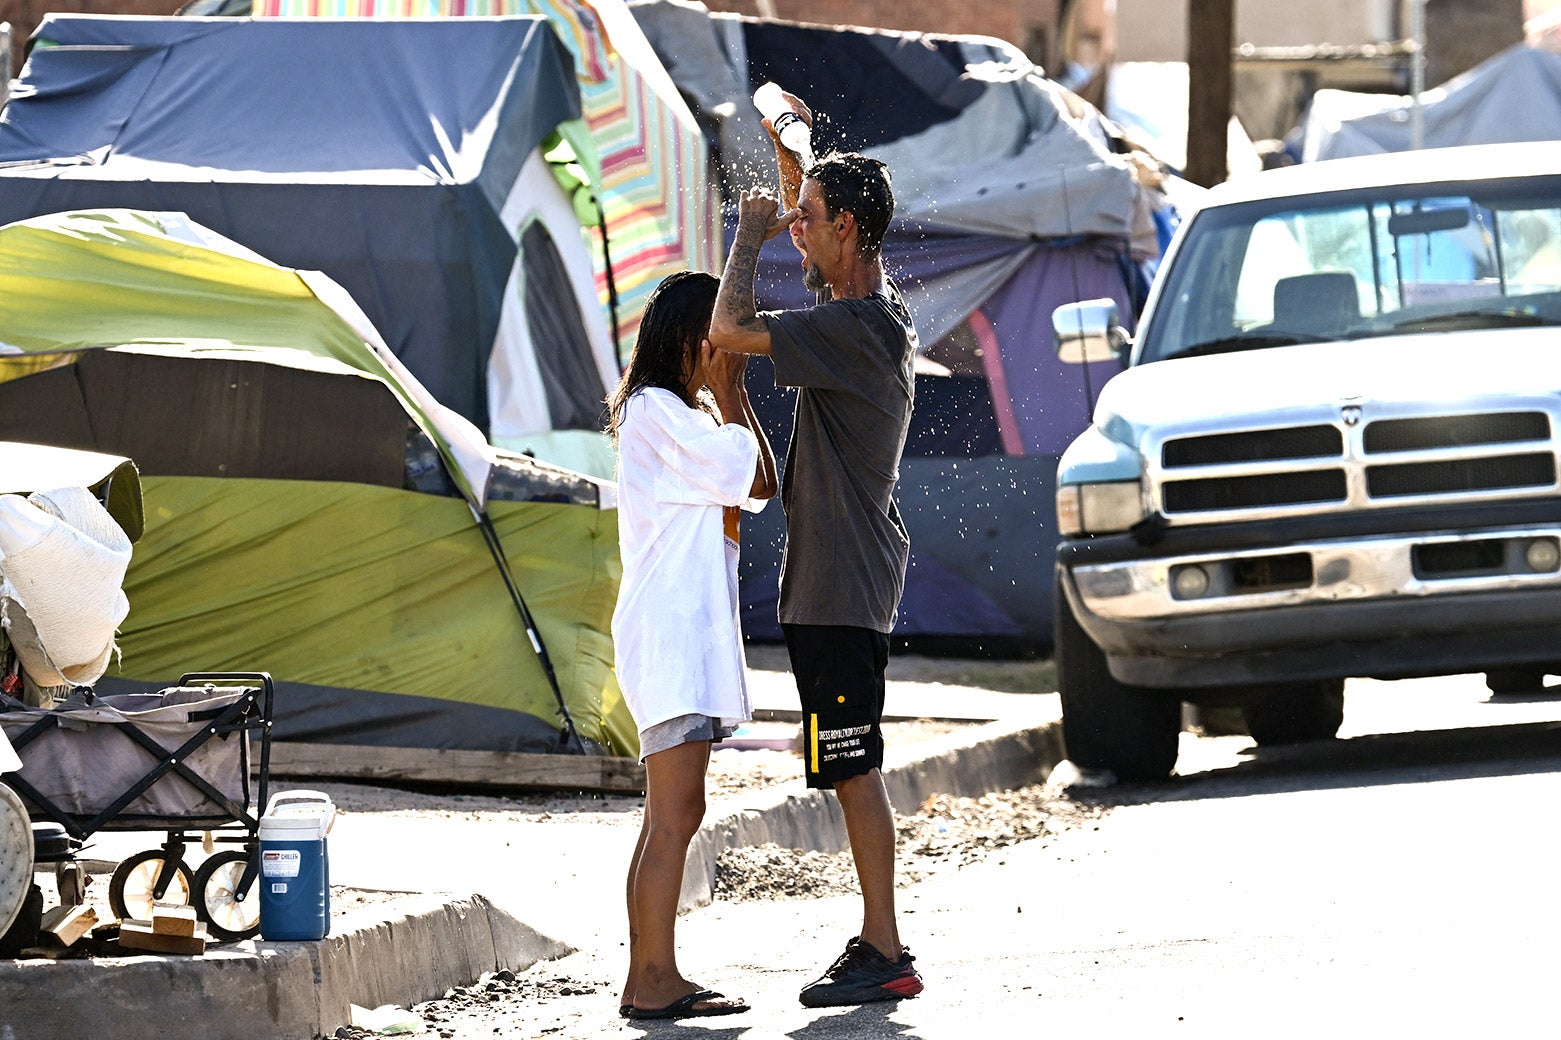 People pour water on themselves in front of tents in Phoenix.